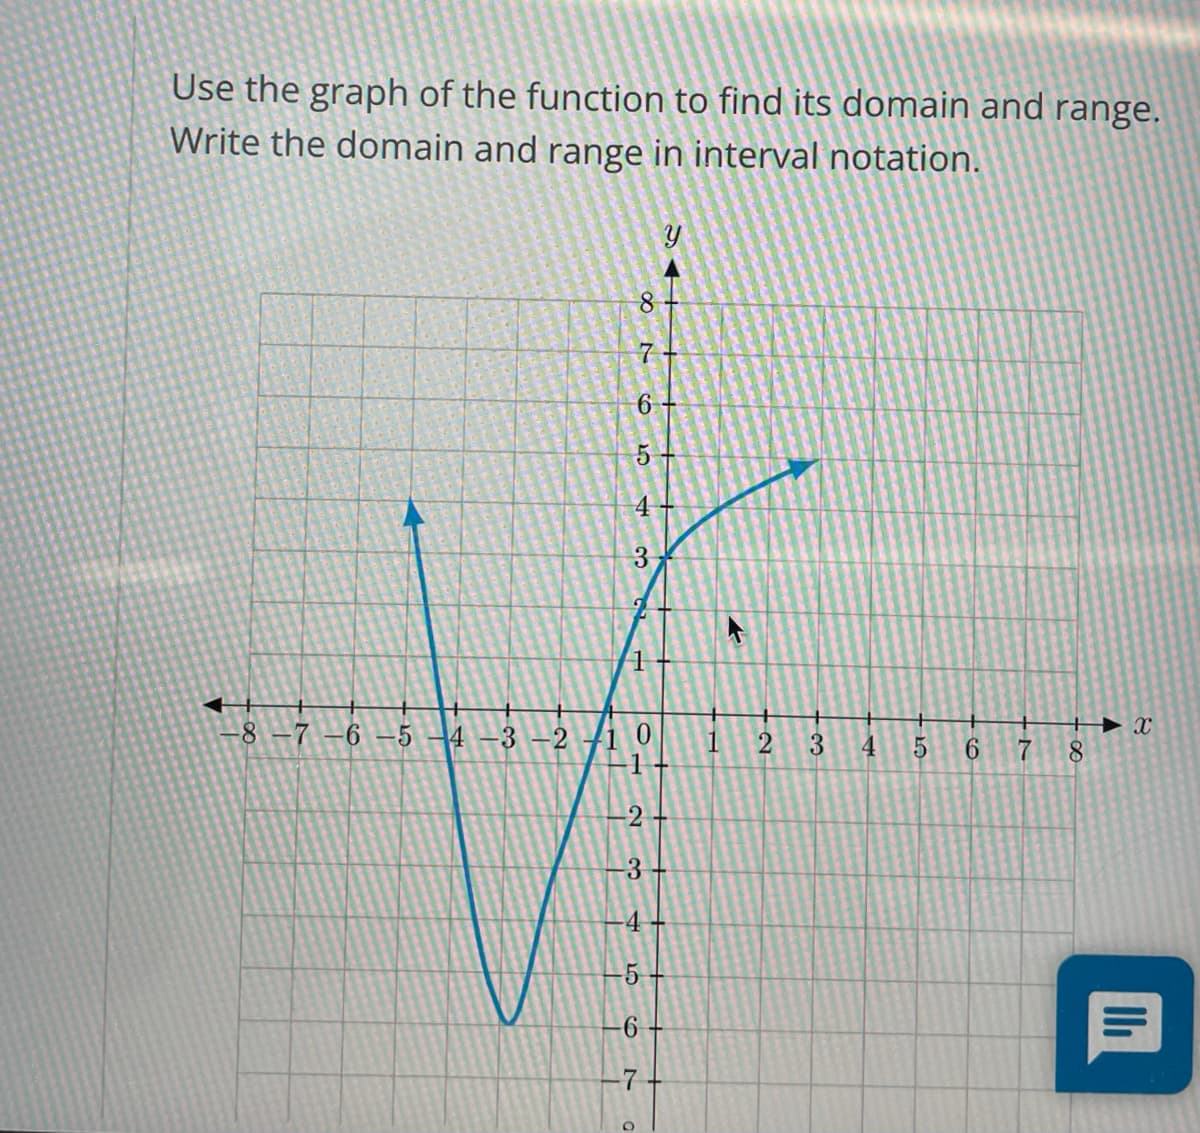 Use the graph of the function to find its domain and range.
Write the domain and range in interval notation.
6
5.
4+
3
-8 -7 –6 –5
-3-21 0
-1
4
3
4.
6.
8.
-2
4
-5
